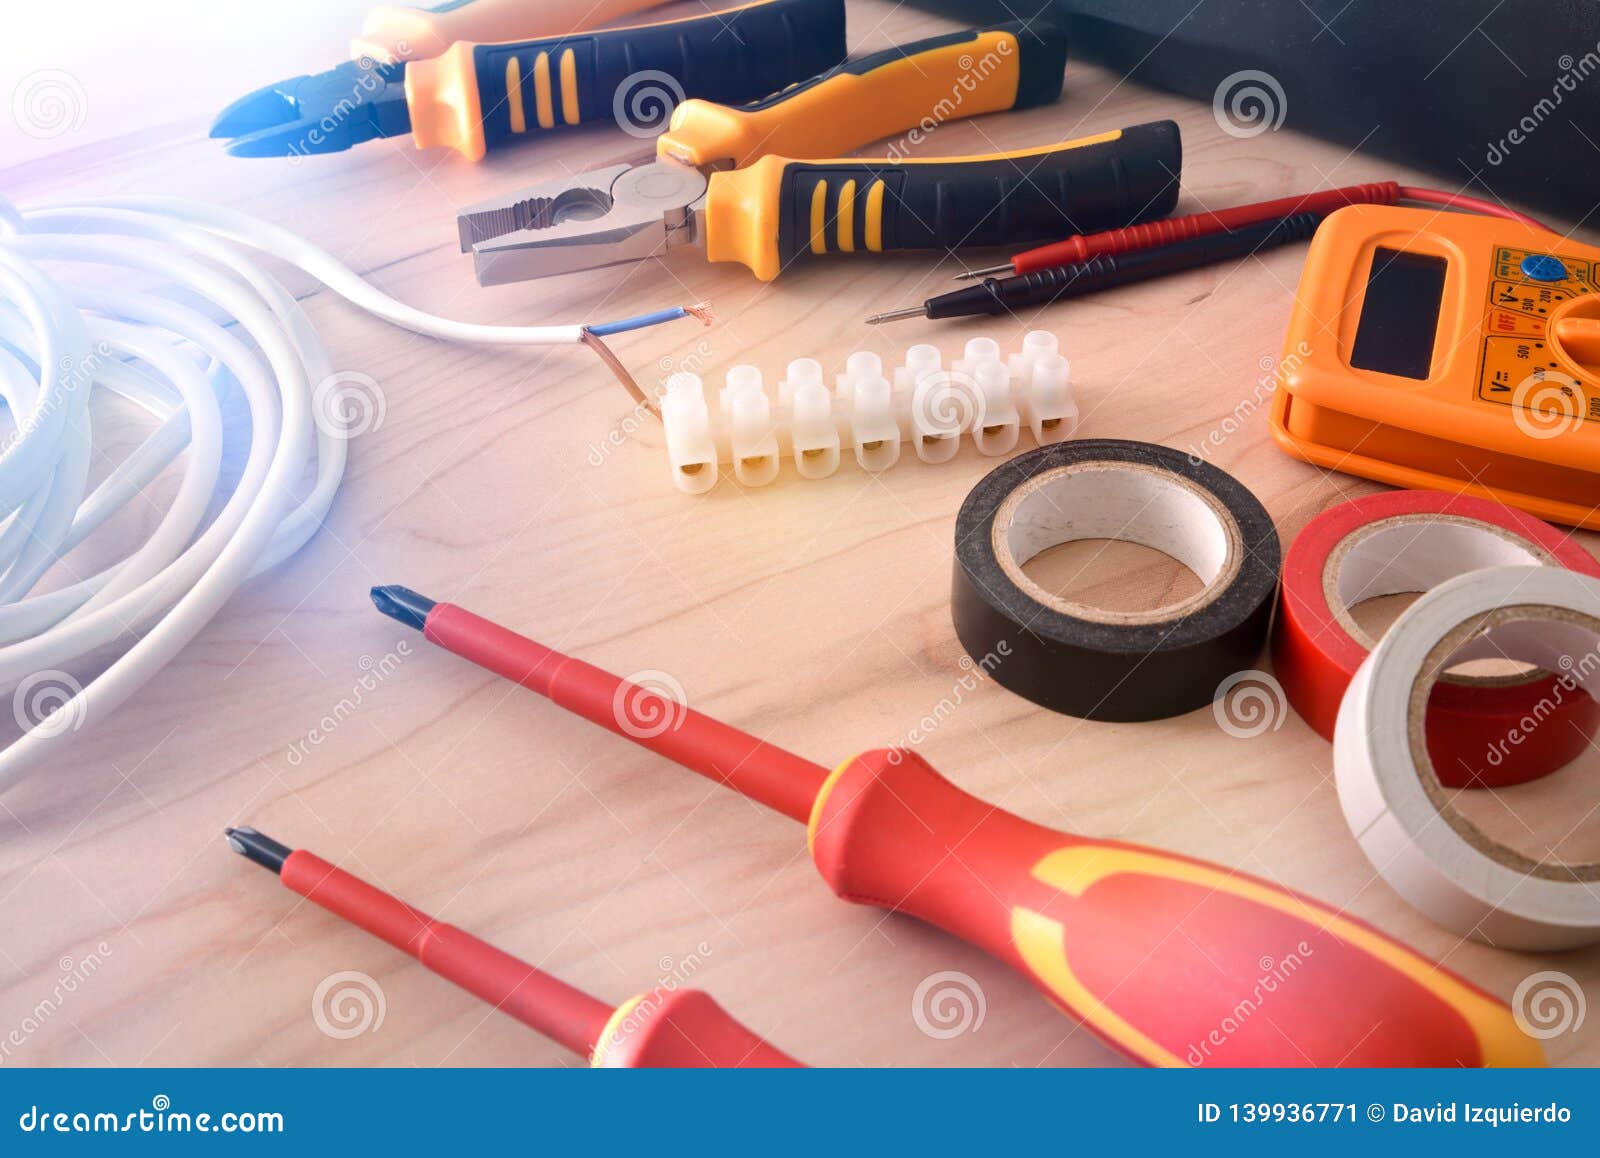 composition of tools for electrical repairs on wooden table elevated